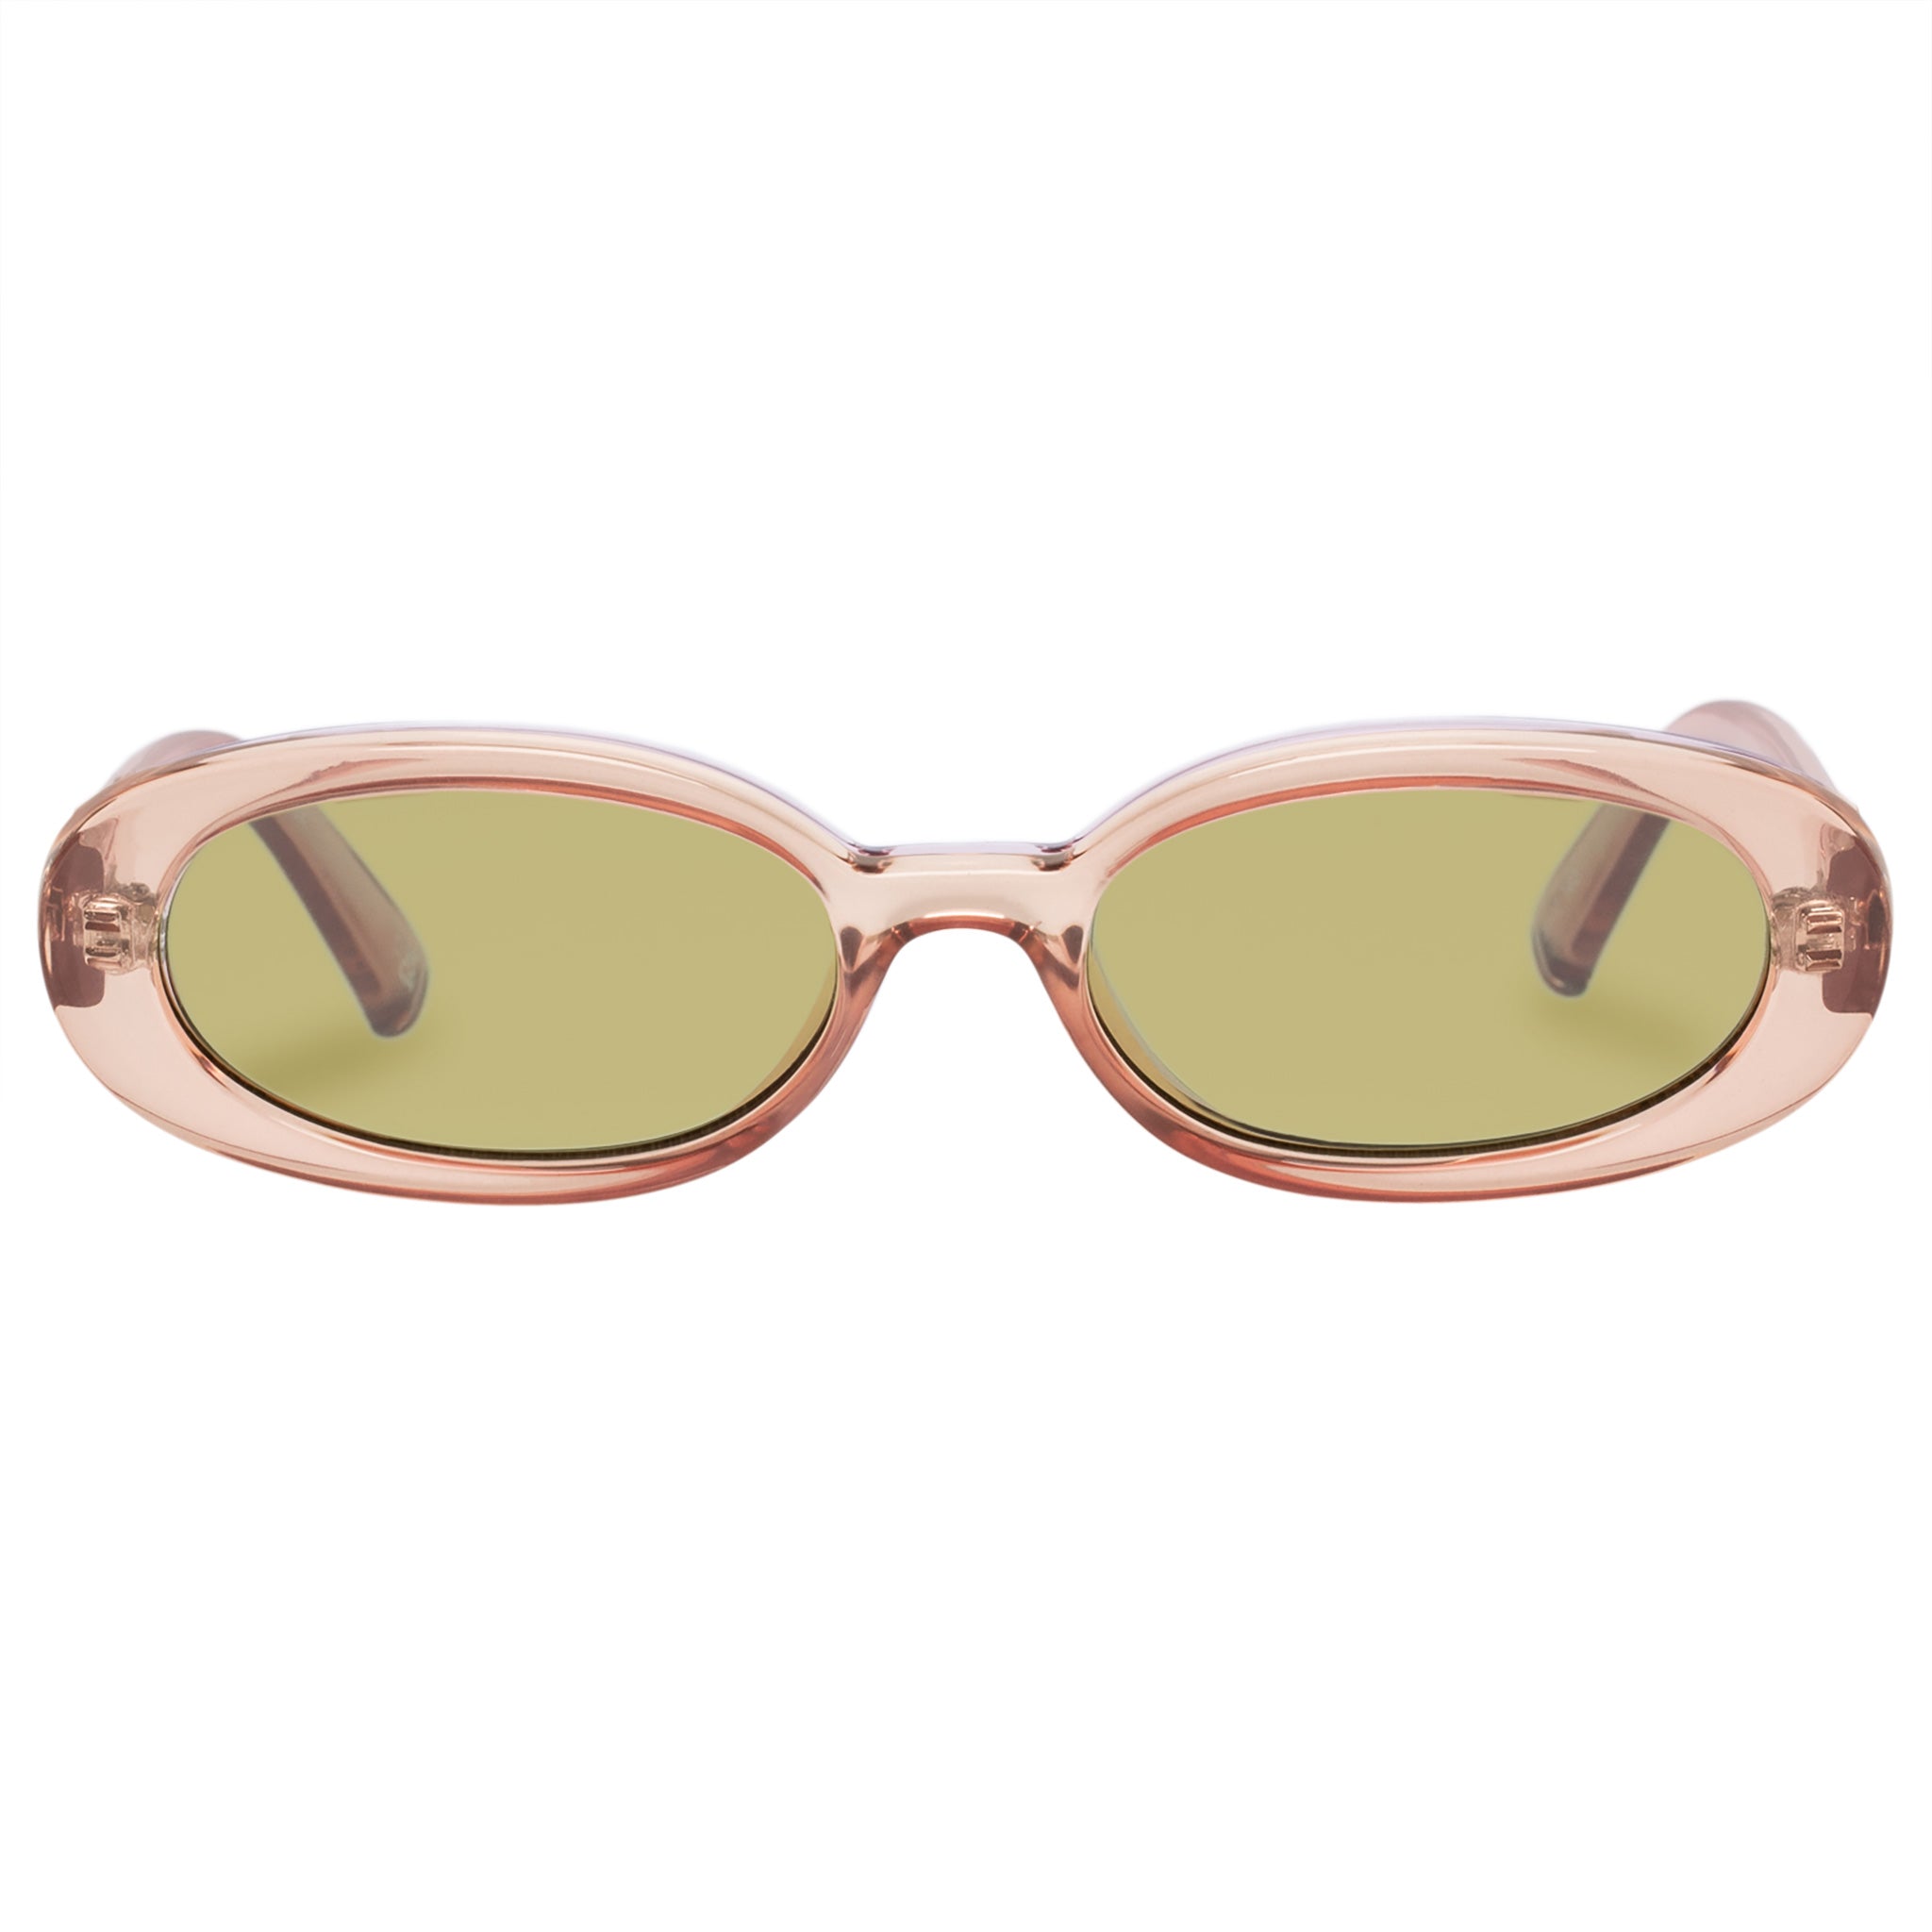 Shop Ron Herman 2023 SS Unisex Street Style Khaki Clear Flame Sunglasses by  AfternoonTea81 | BUYMA